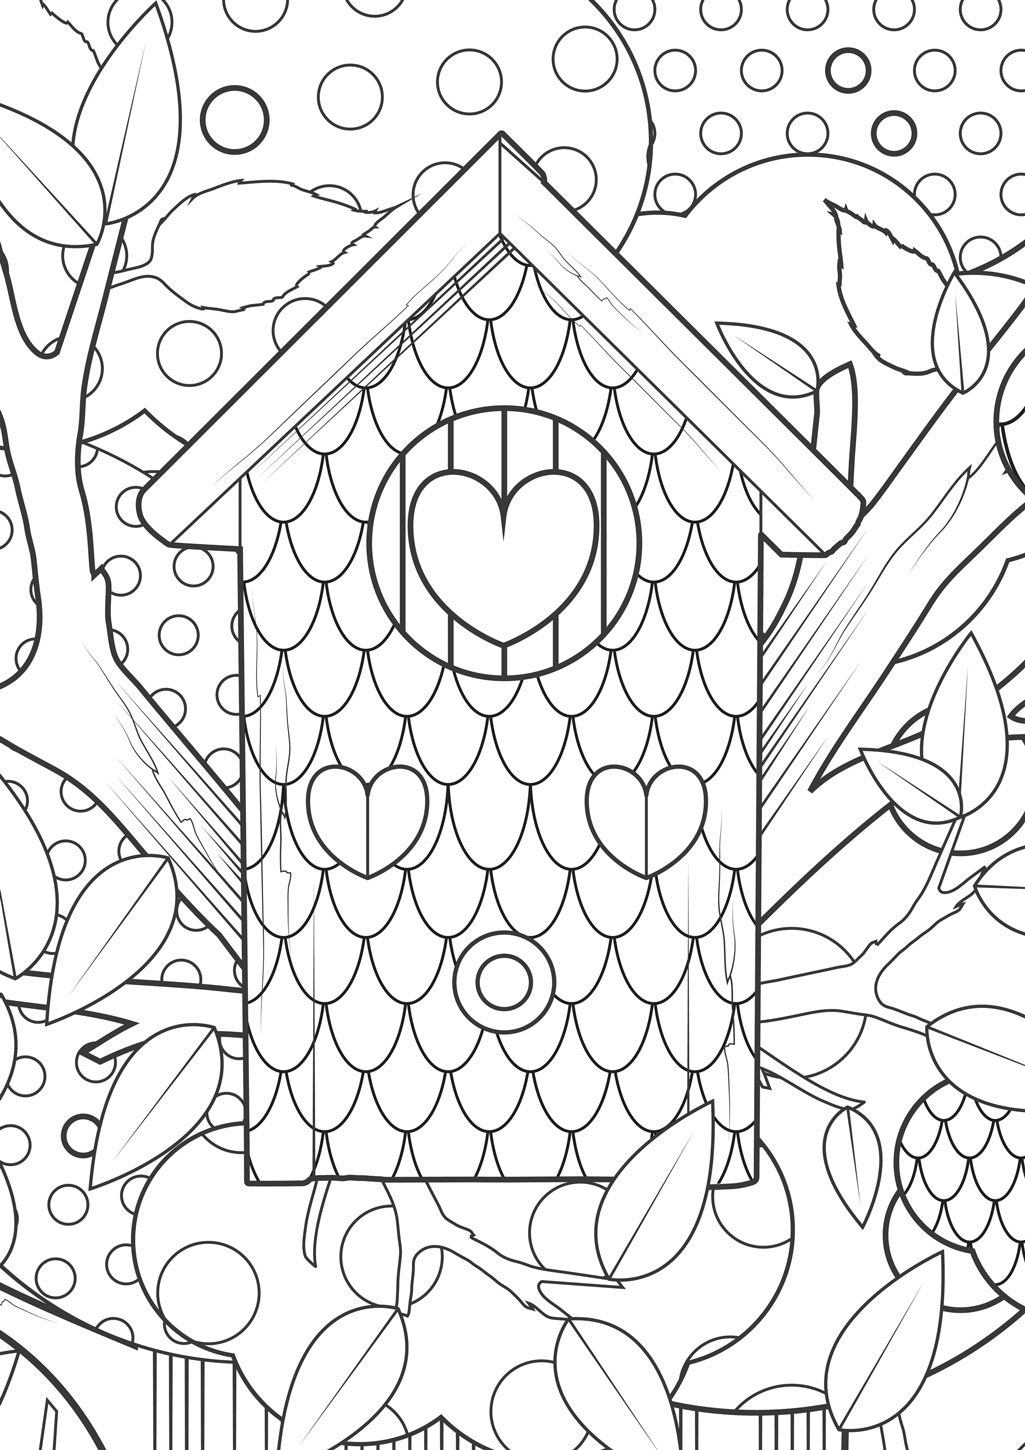 coloring kleurplaat fun adults adult colouring bos sheets printable xl endless hours birdhouse play copy heart cool hart cute bird